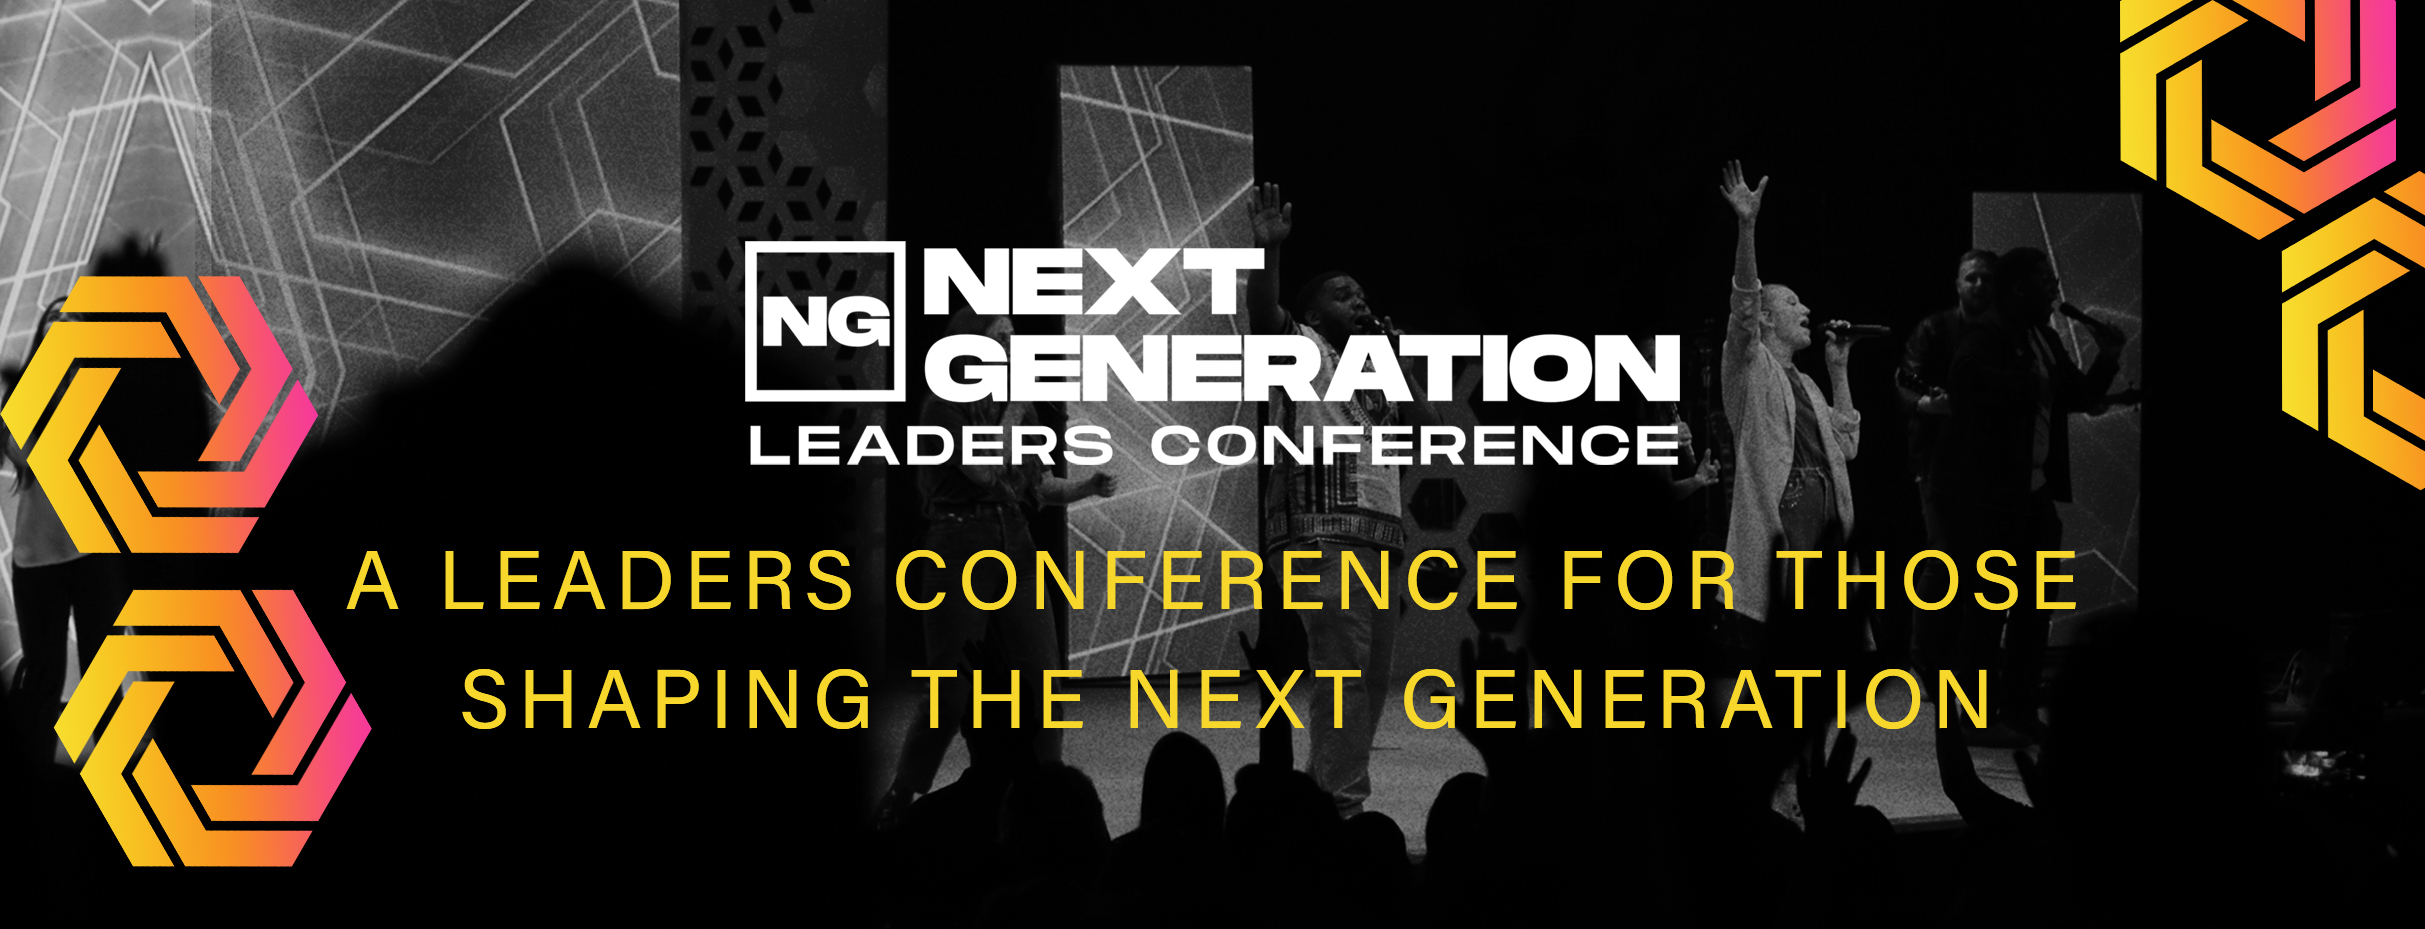 next-generation-leaders-conference-promotion